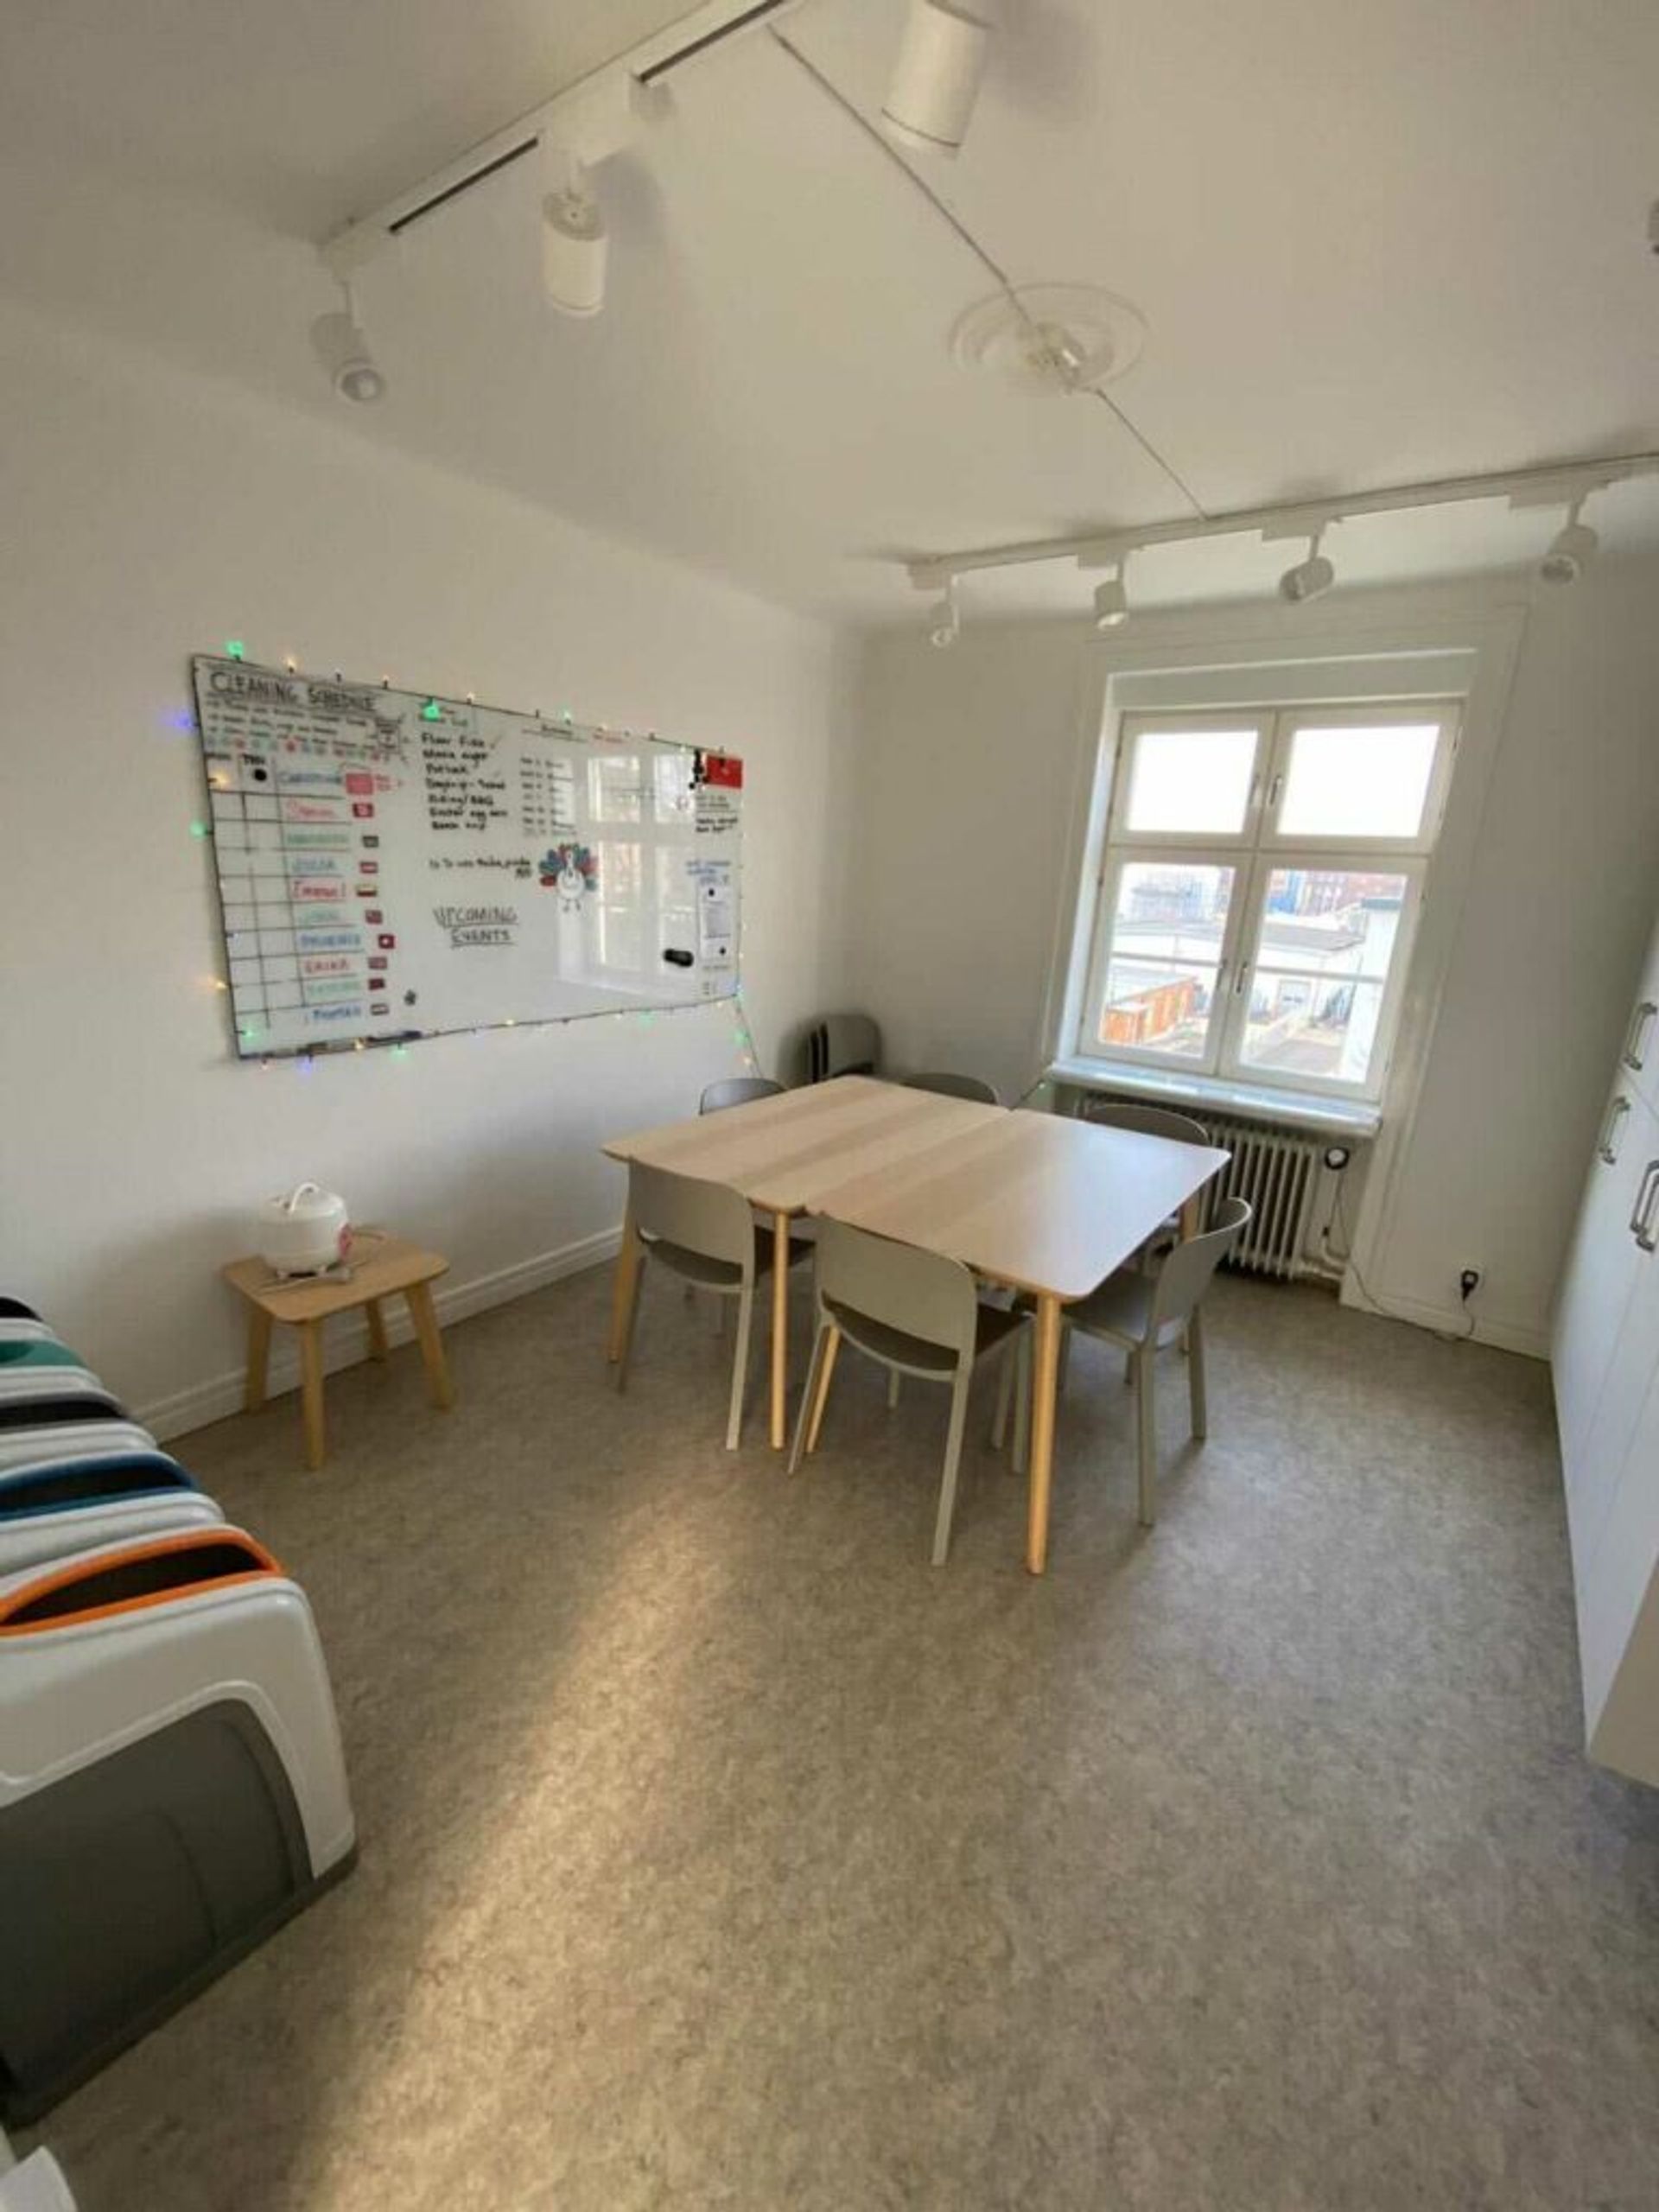 A room with a white board and a table with four chairs in a shared accommodation. 